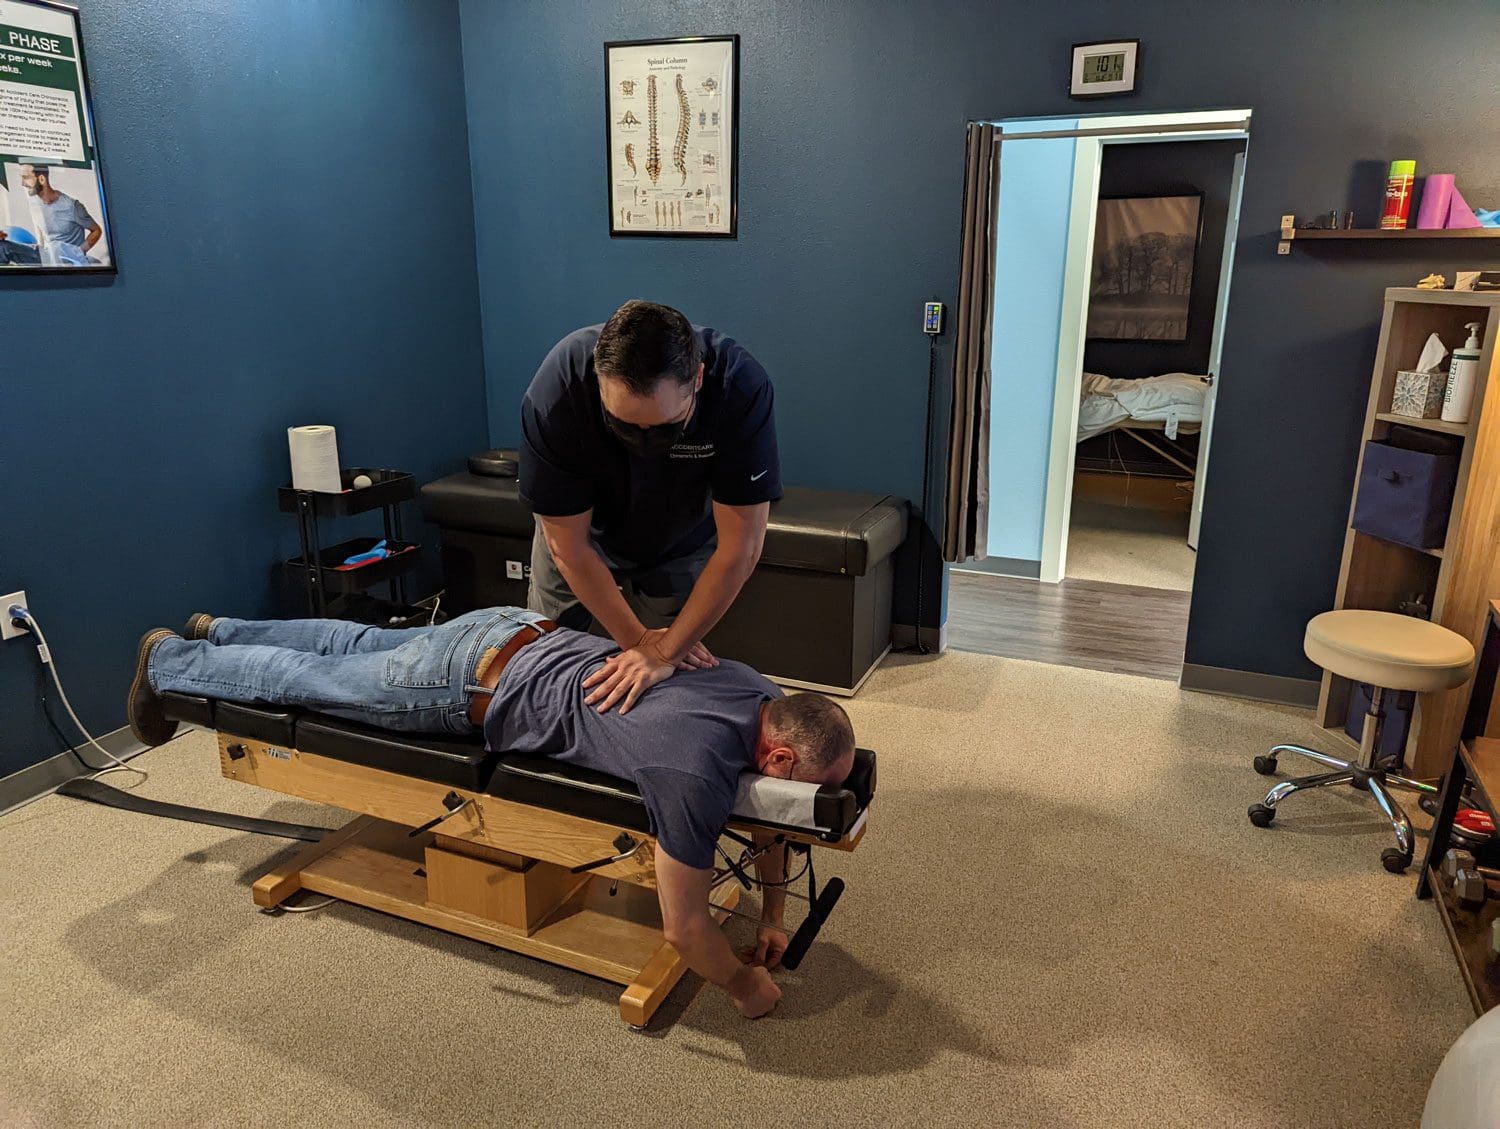 A chiropractor administering chiropractic treatment at the Vancouver clinic.